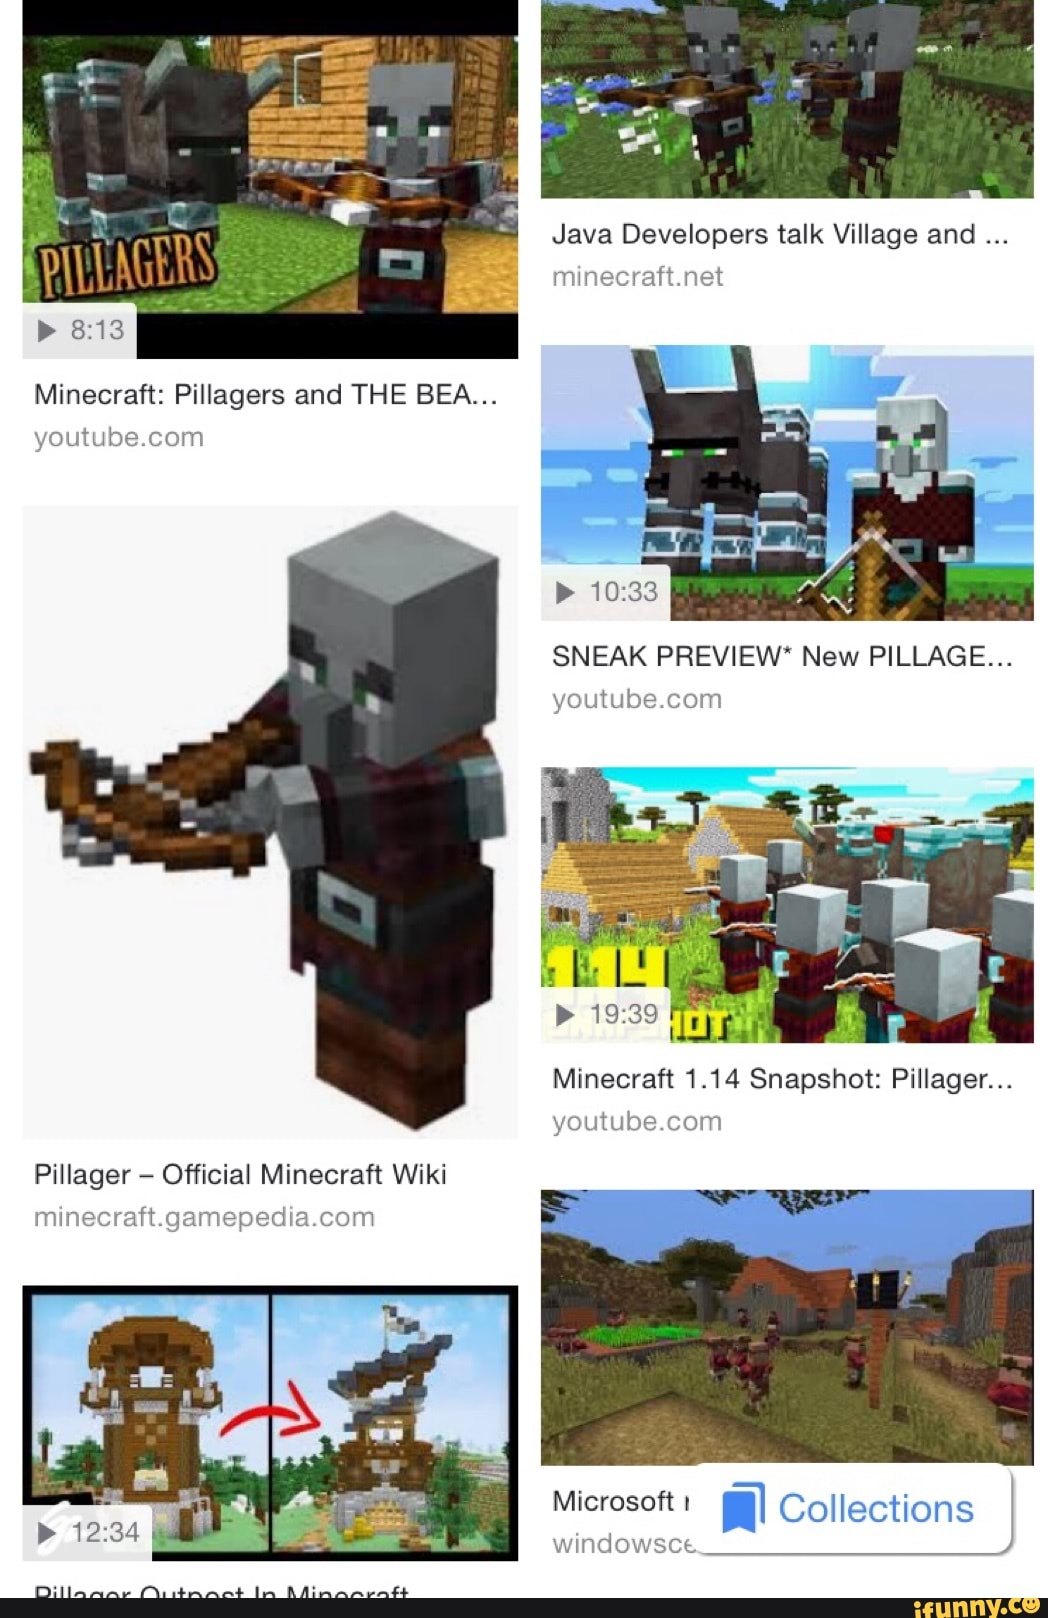 Java Developers Talk Village And Minecraft Pillagers And The Bea Youtube Com Sneak Preview New Pillage Pillager Official Minecraft Wiki